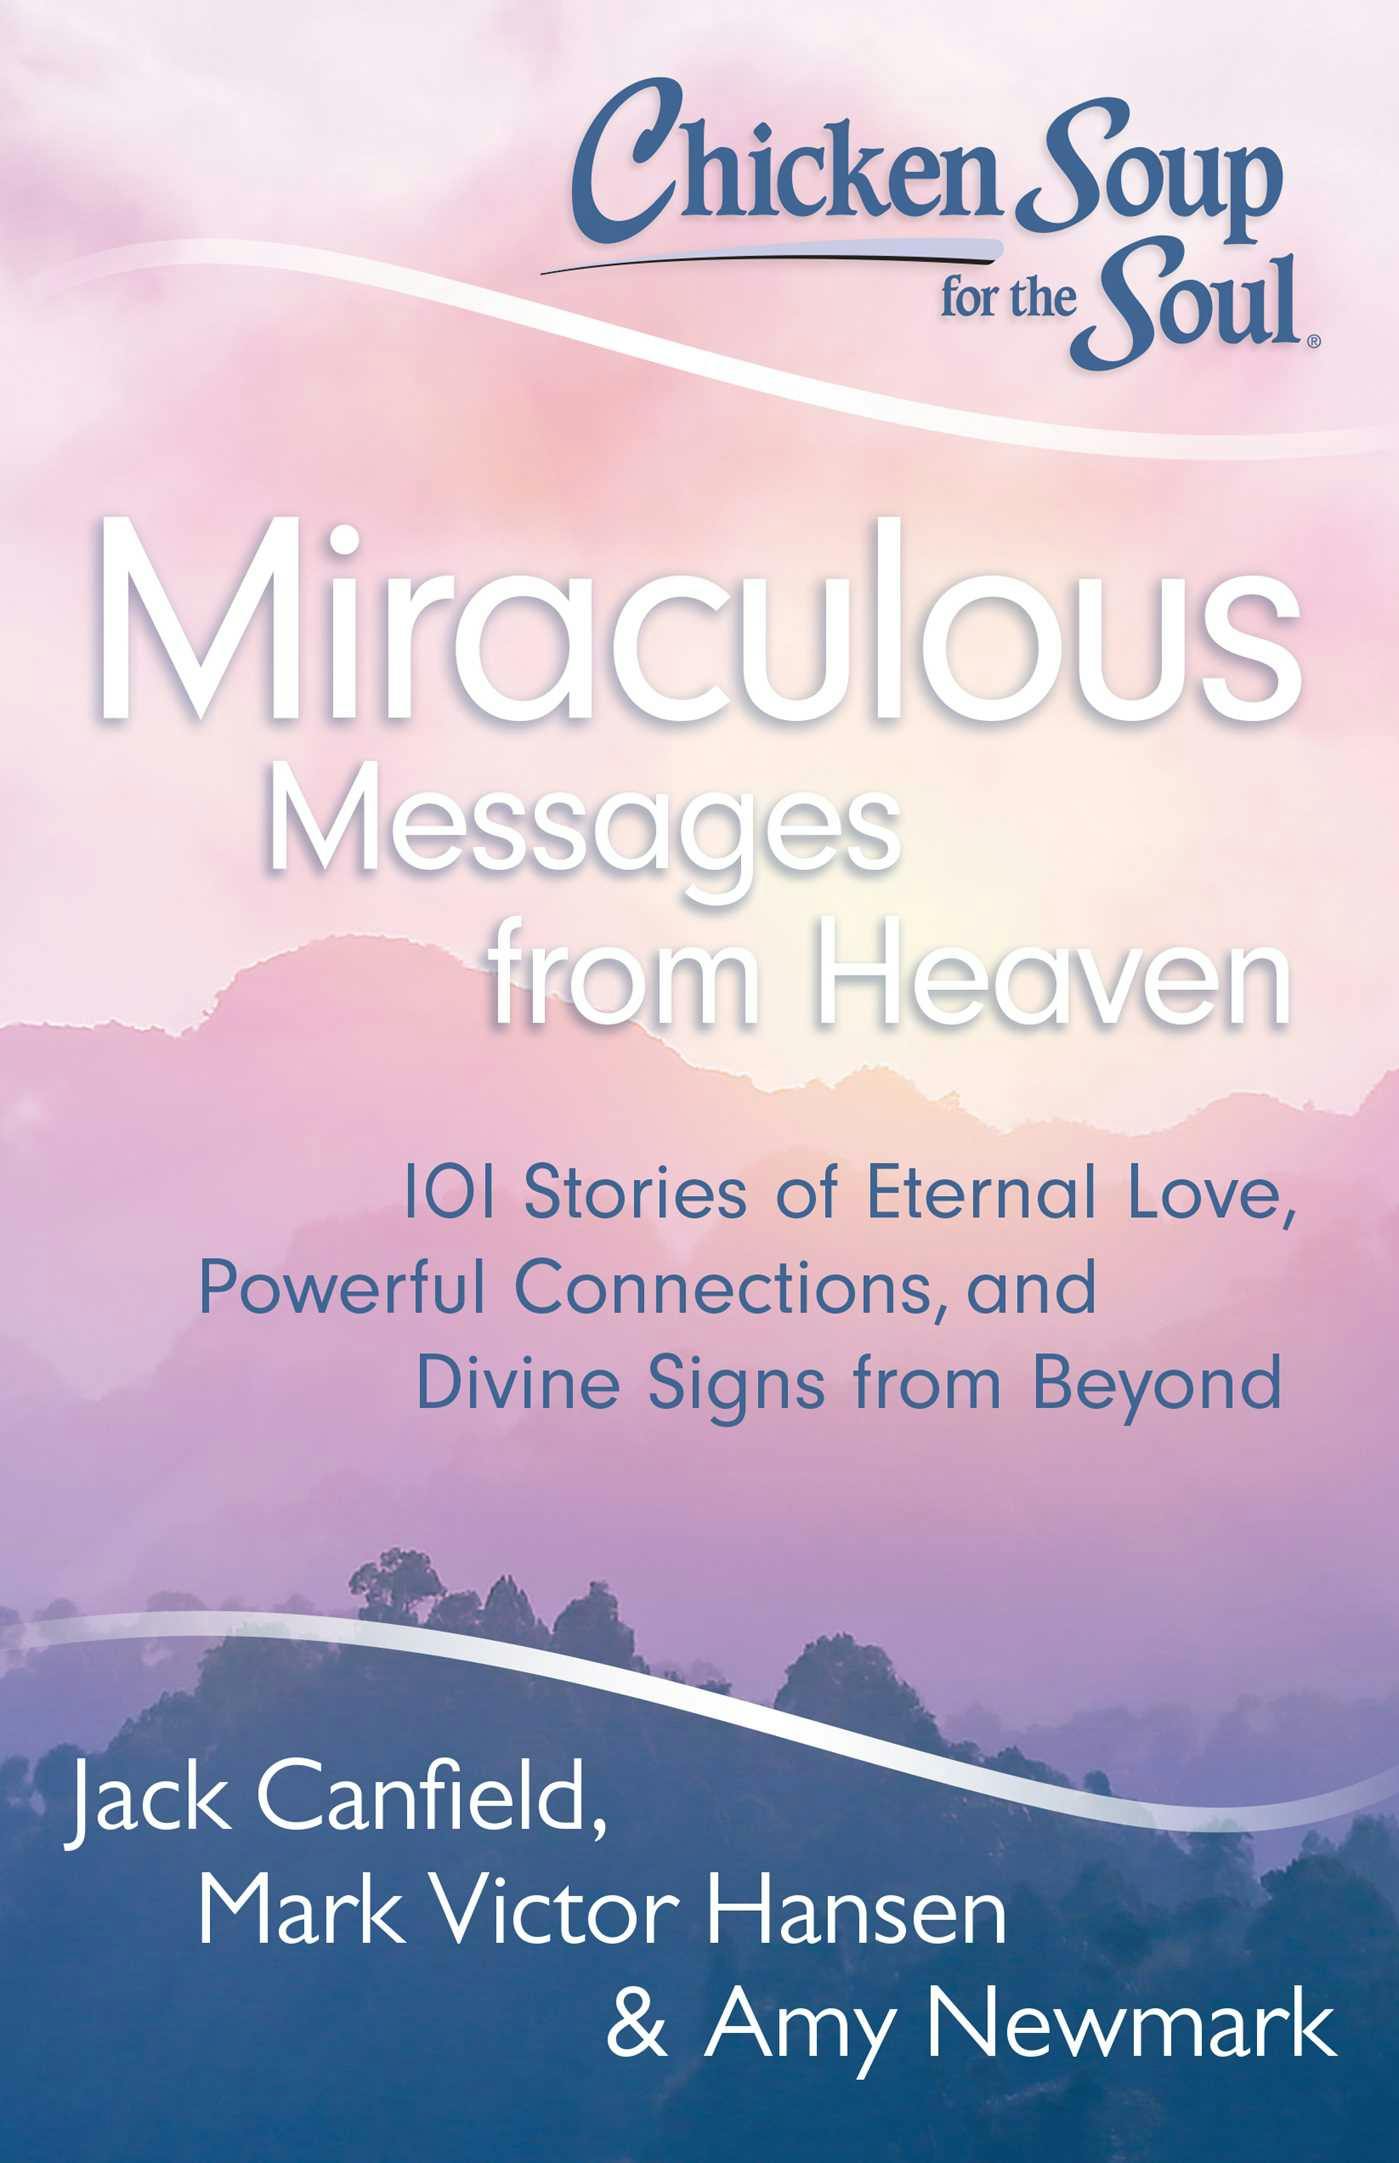 Chicken Soup for the Soul: Miraculous Messages from Heaven: 101 Stories of Eternal Love, Powerful Connections, and Divine Signs from Beyond - Mark Victor Hansen, Jack Canfield, Amy Newmark